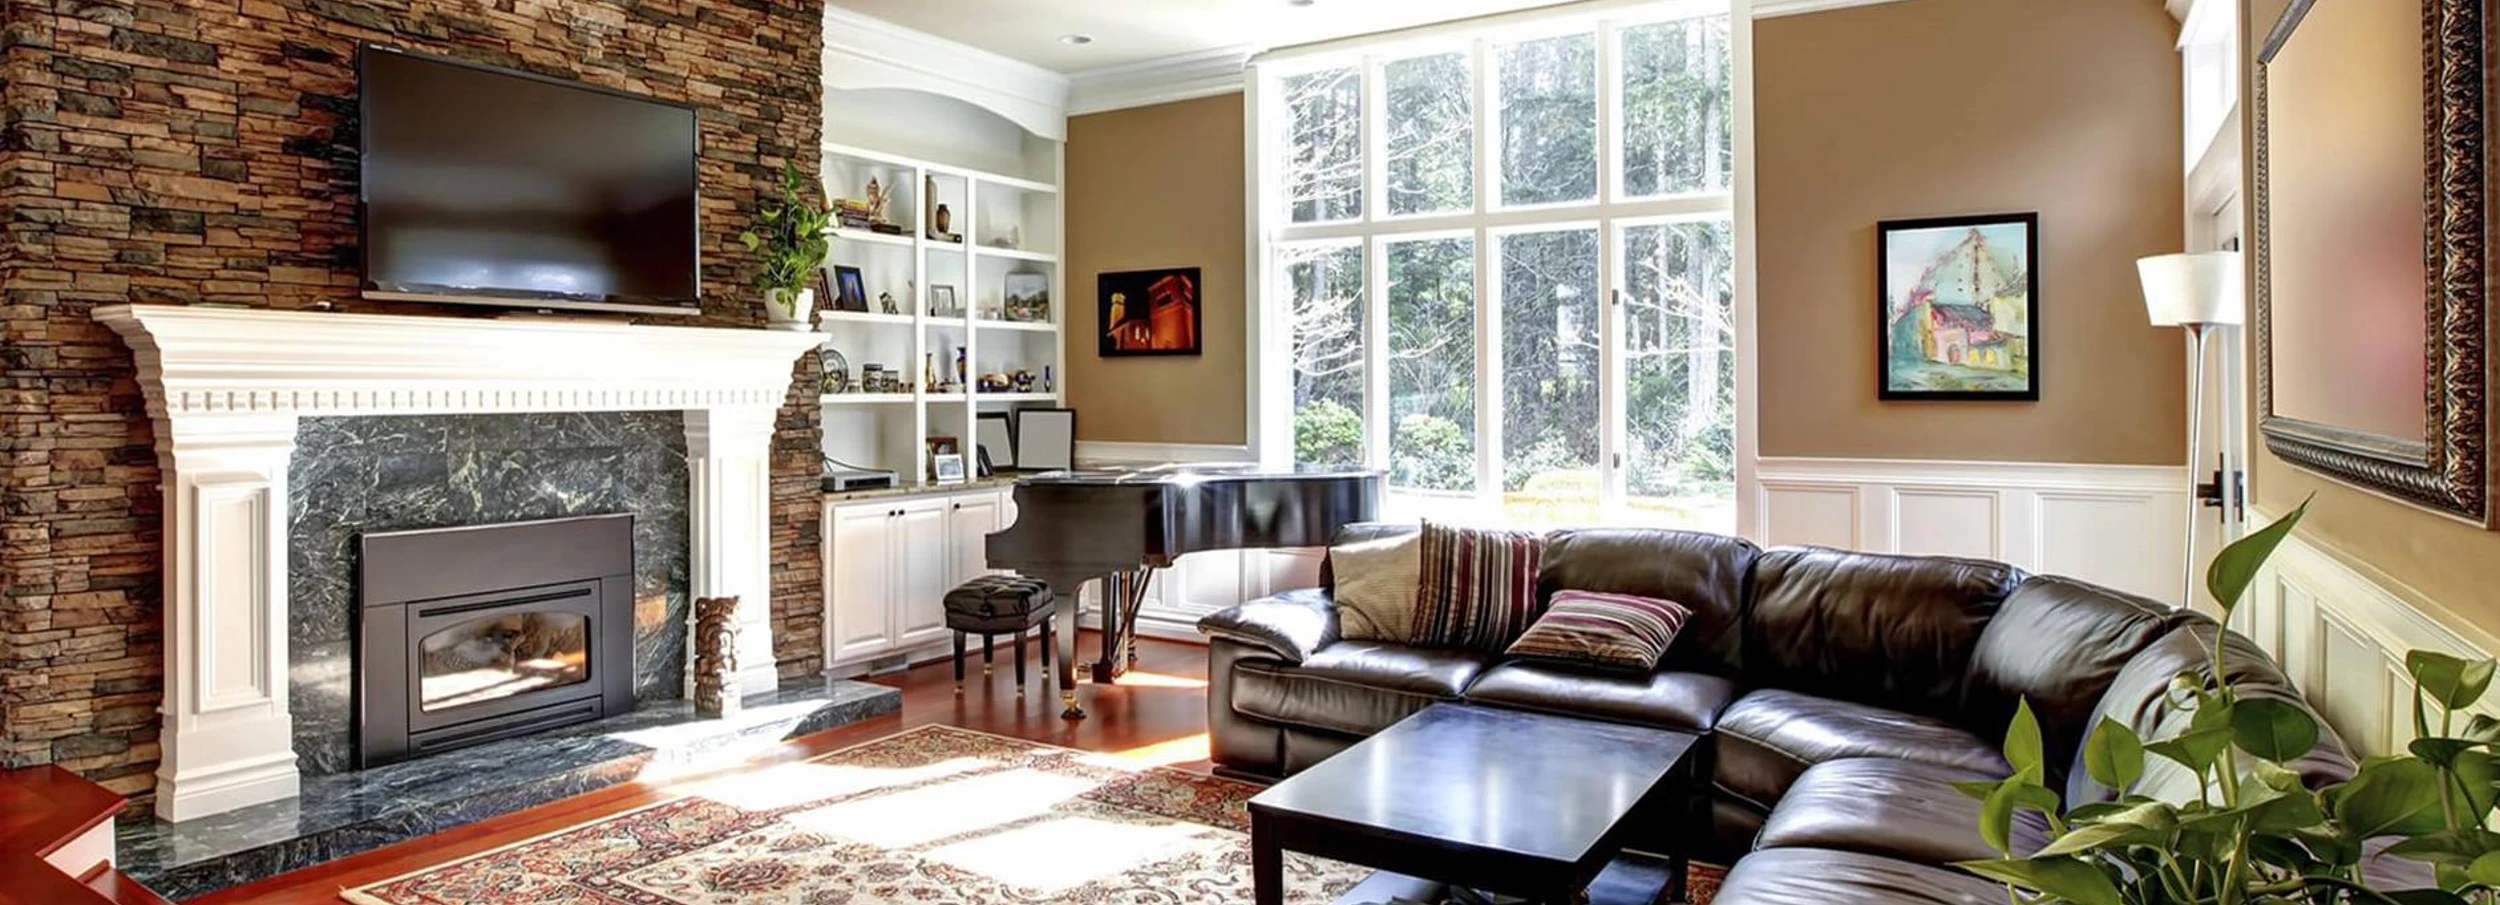 Brown themed living room with leader couch and brick fireplace.